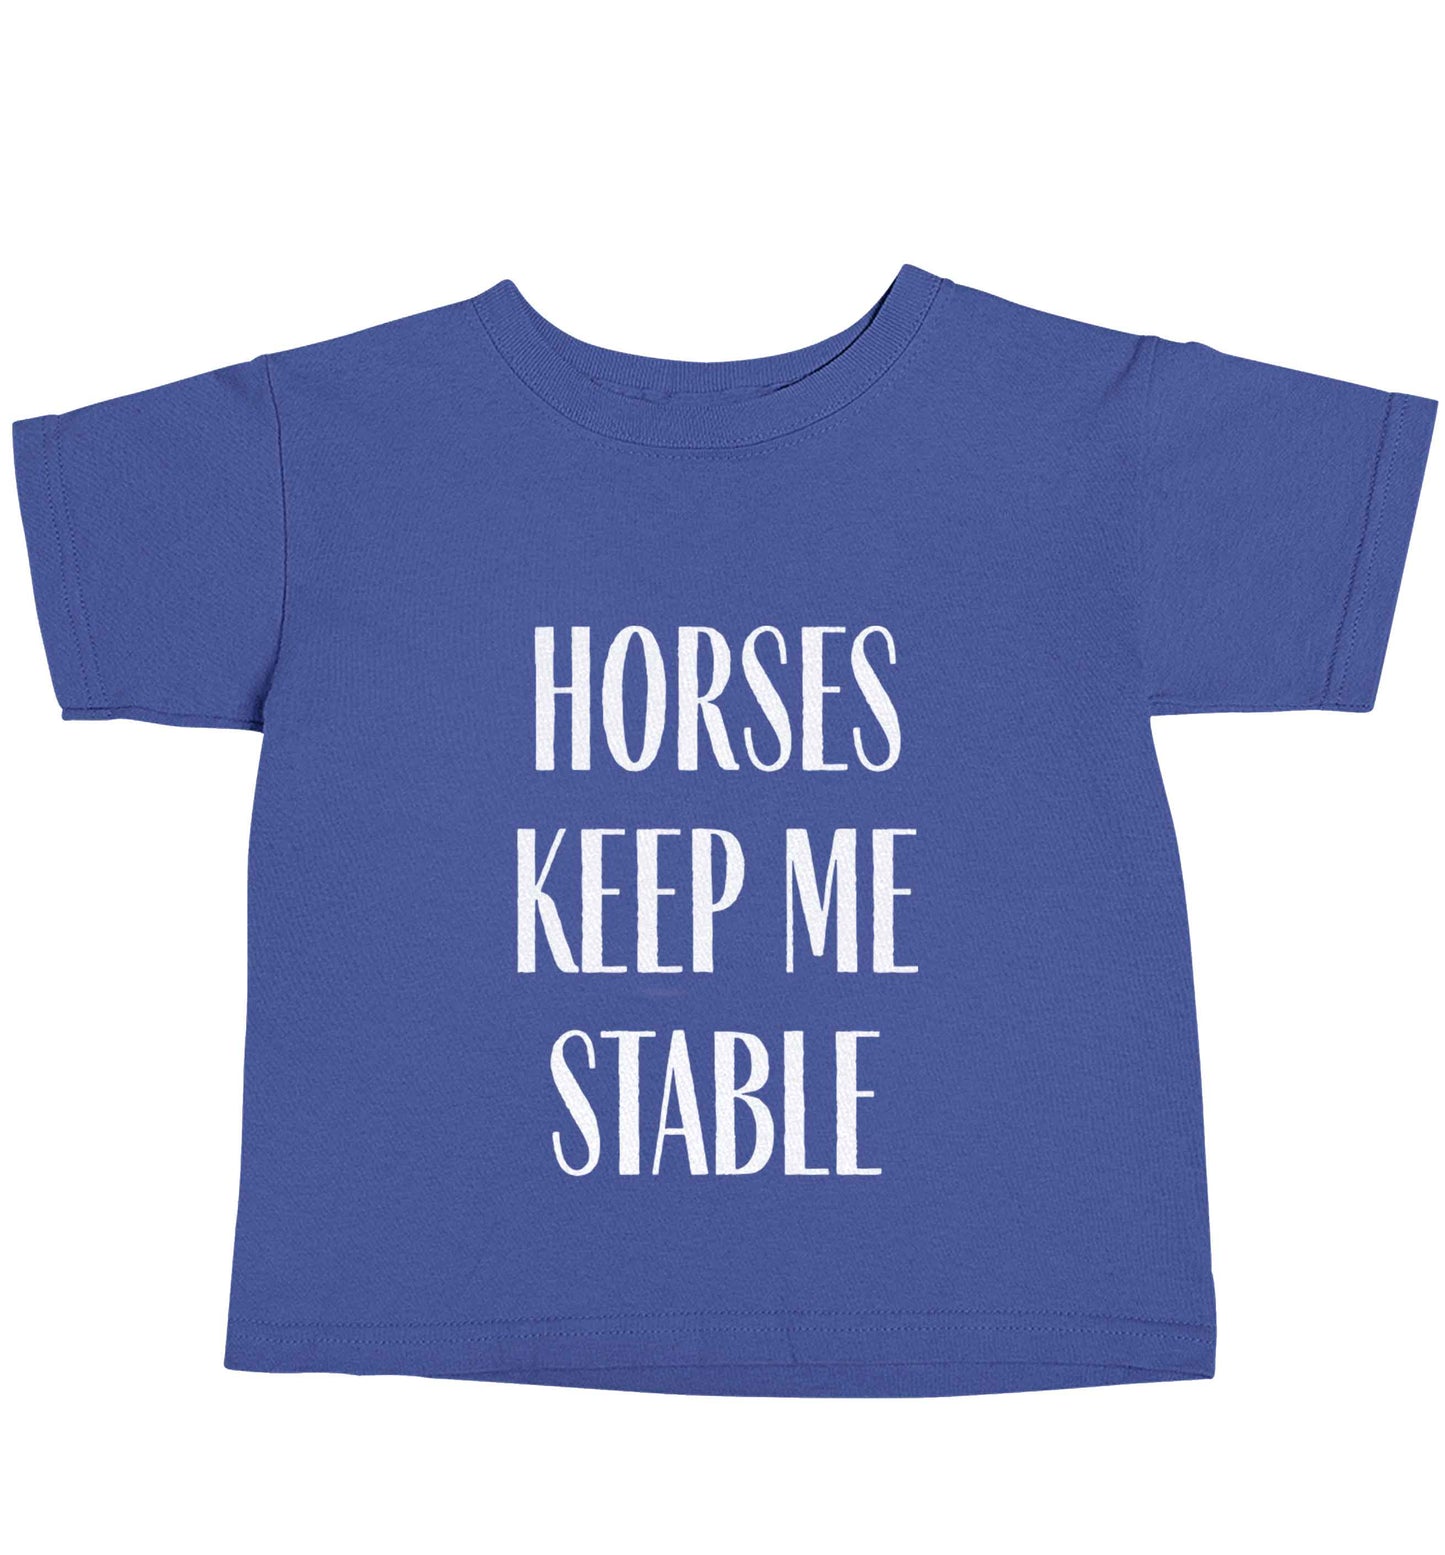 Horses keep me stable blue baby toddler Tshirt 2 Years